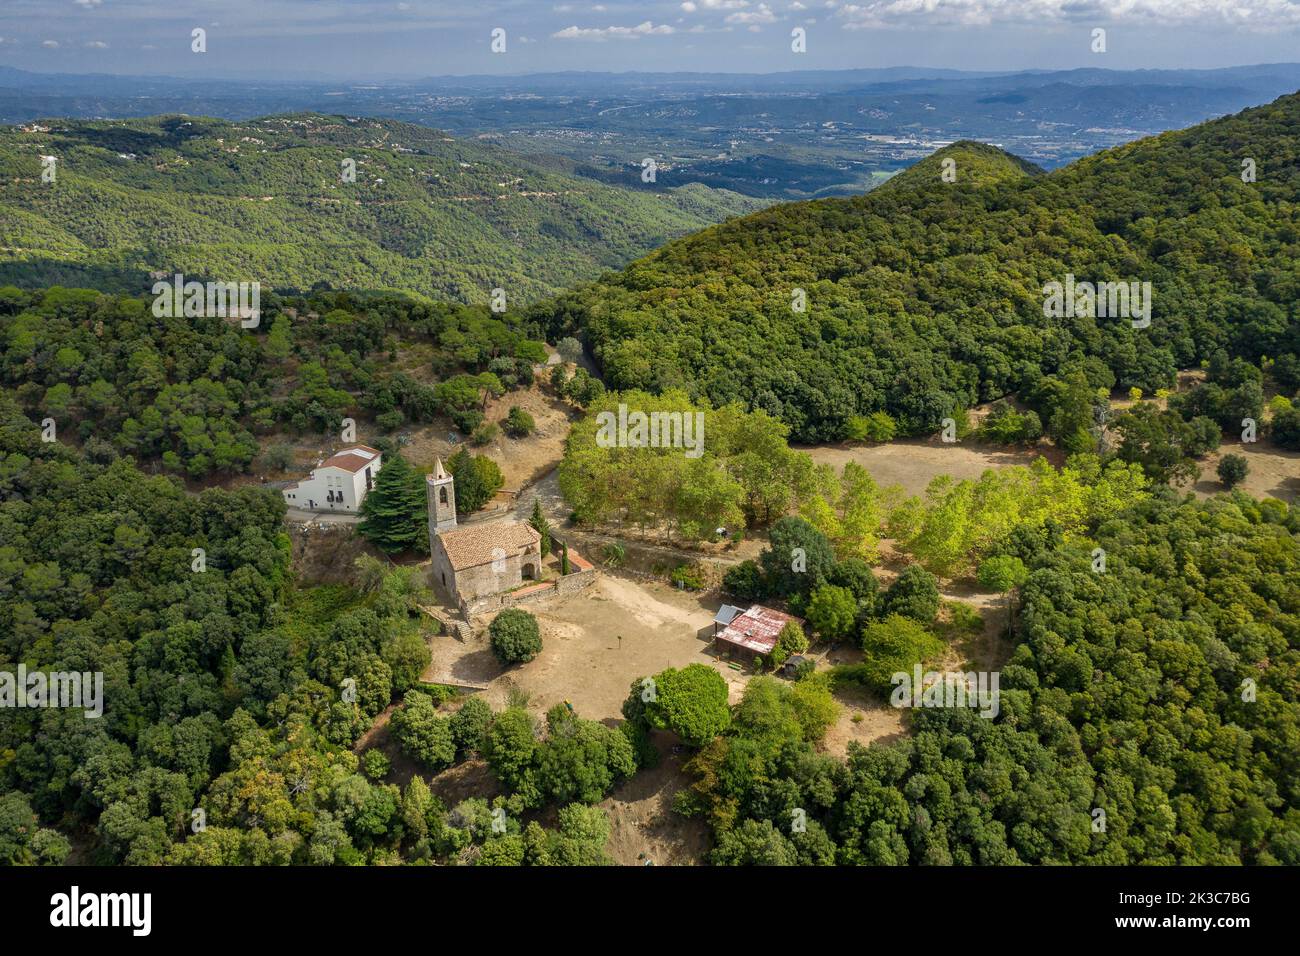 Aerial view of the village of Hortsavinyà, located inside the Montnegre mountain (Maresme, Barcelona, Catalonia, Spain) Stock Photo